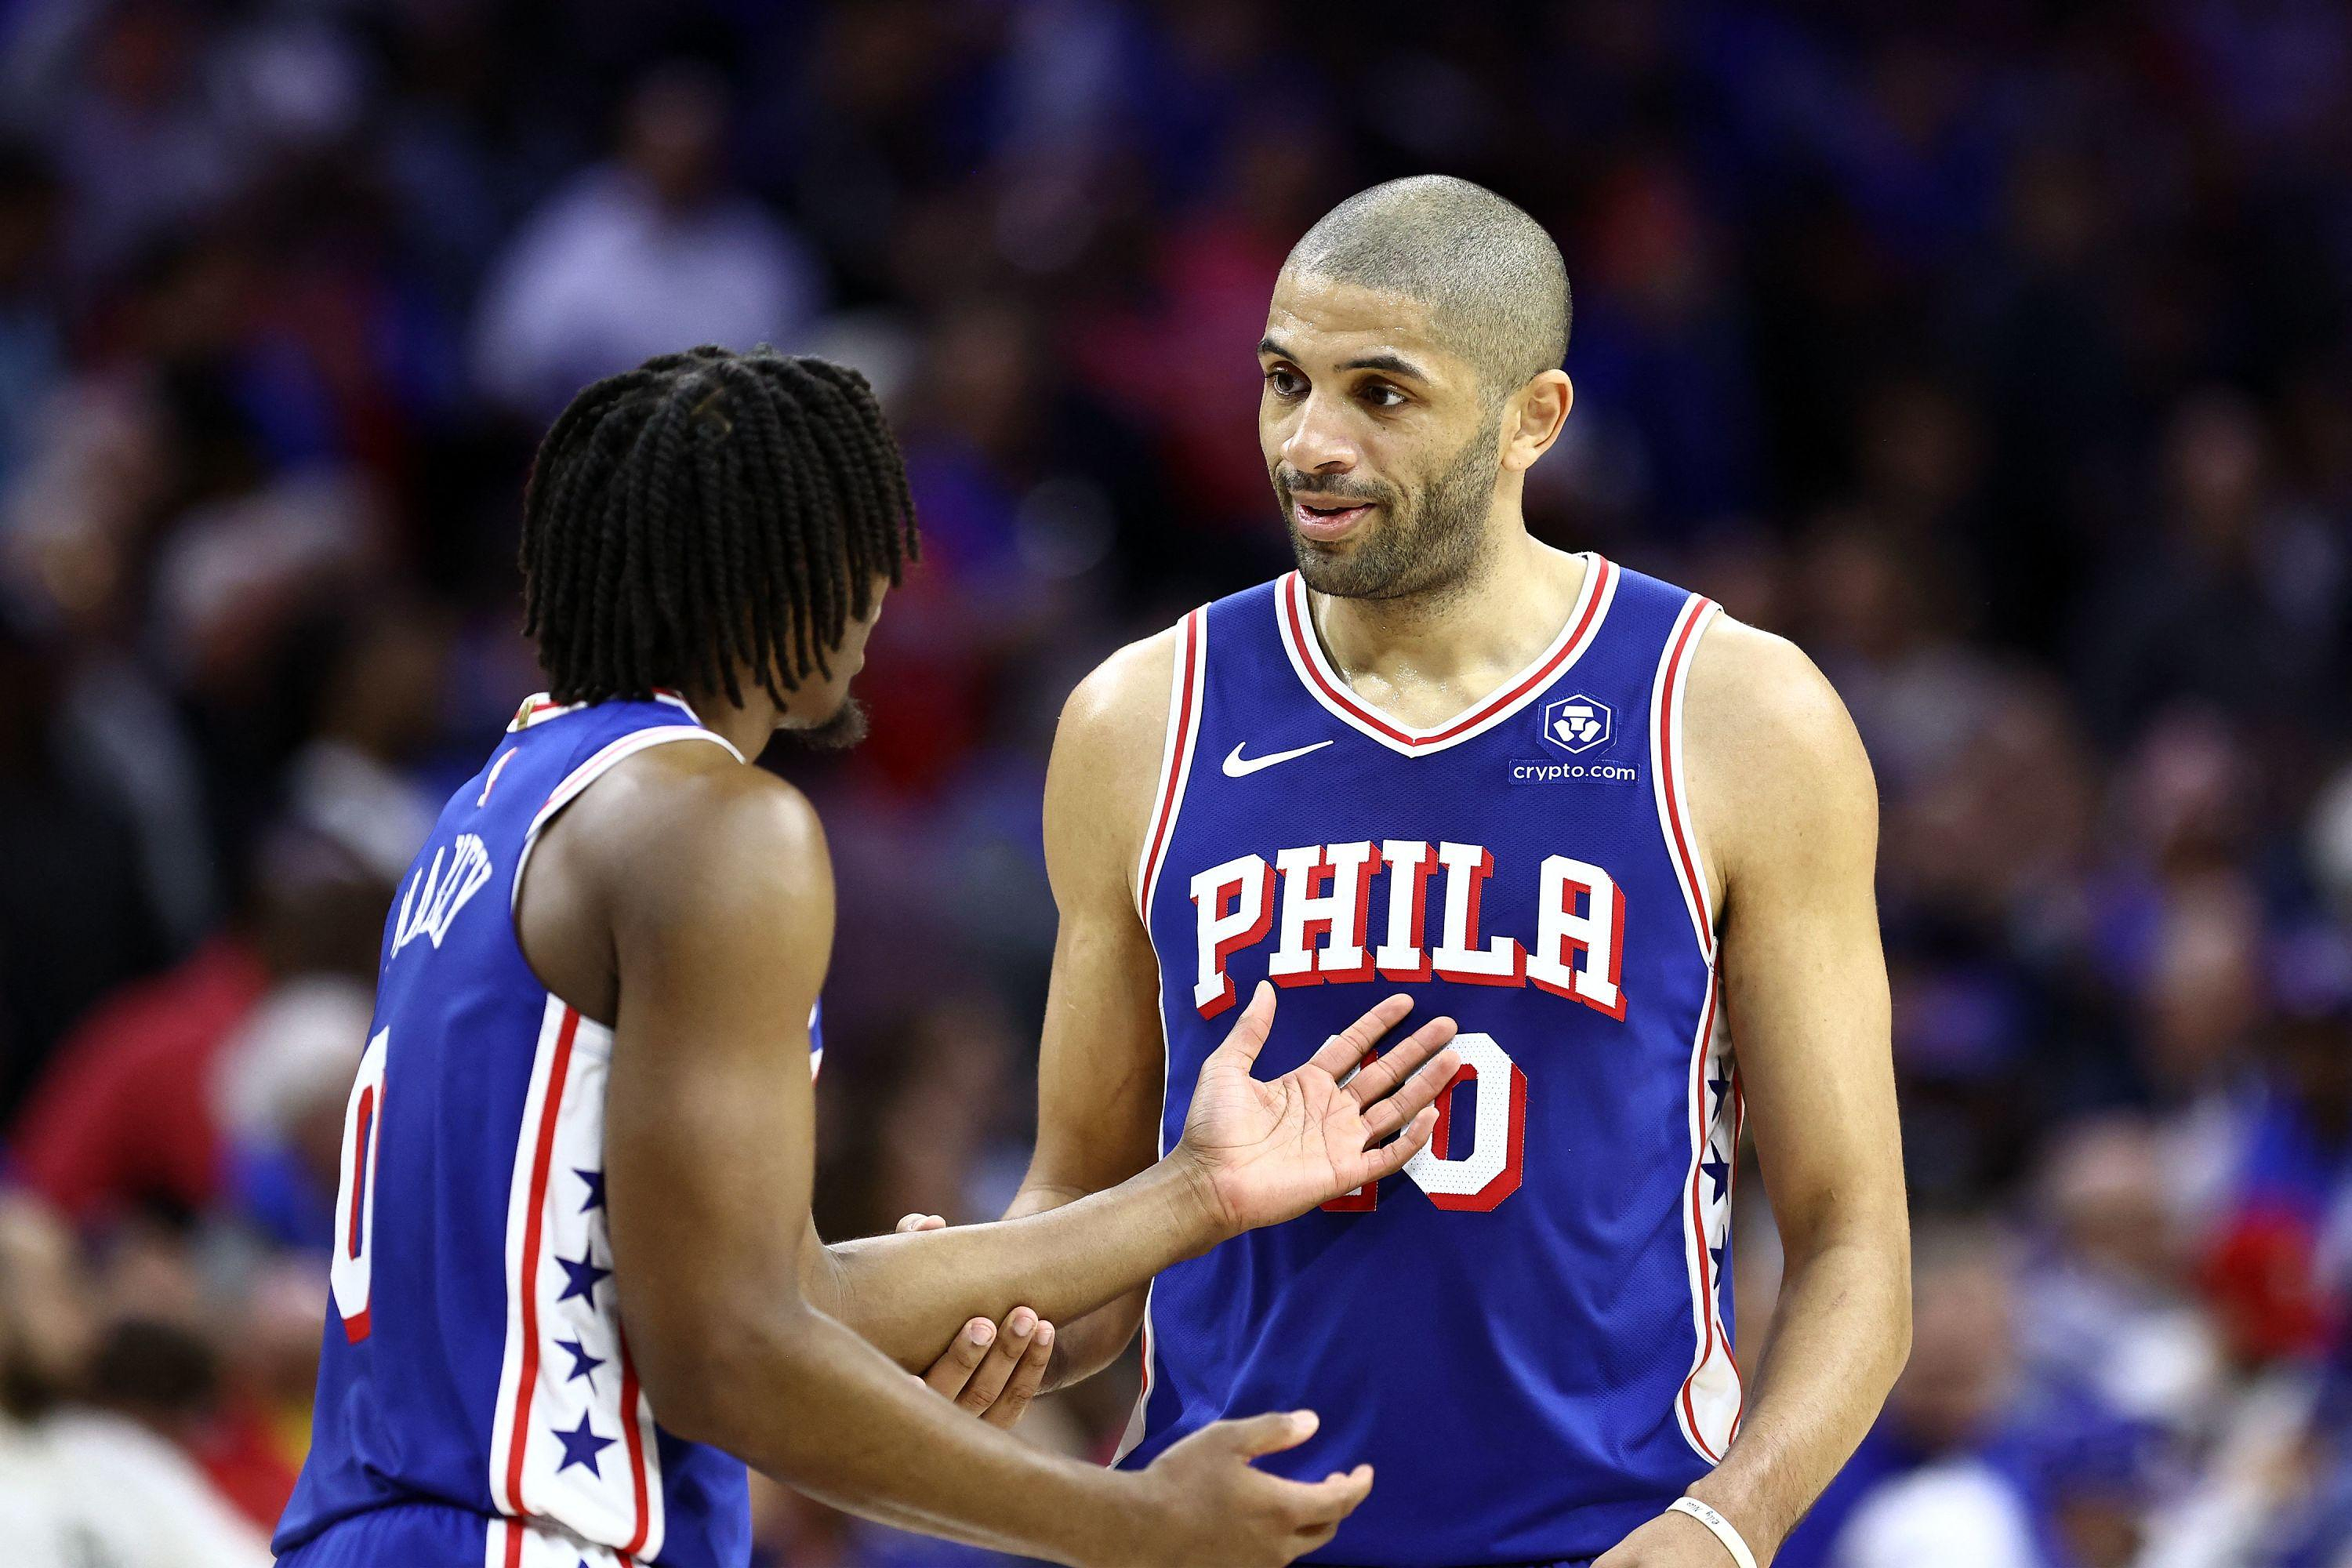 NBA: driven by Batum and Embiid, Philadelphia beats Miami and will challenge the Knicks in the play-offs